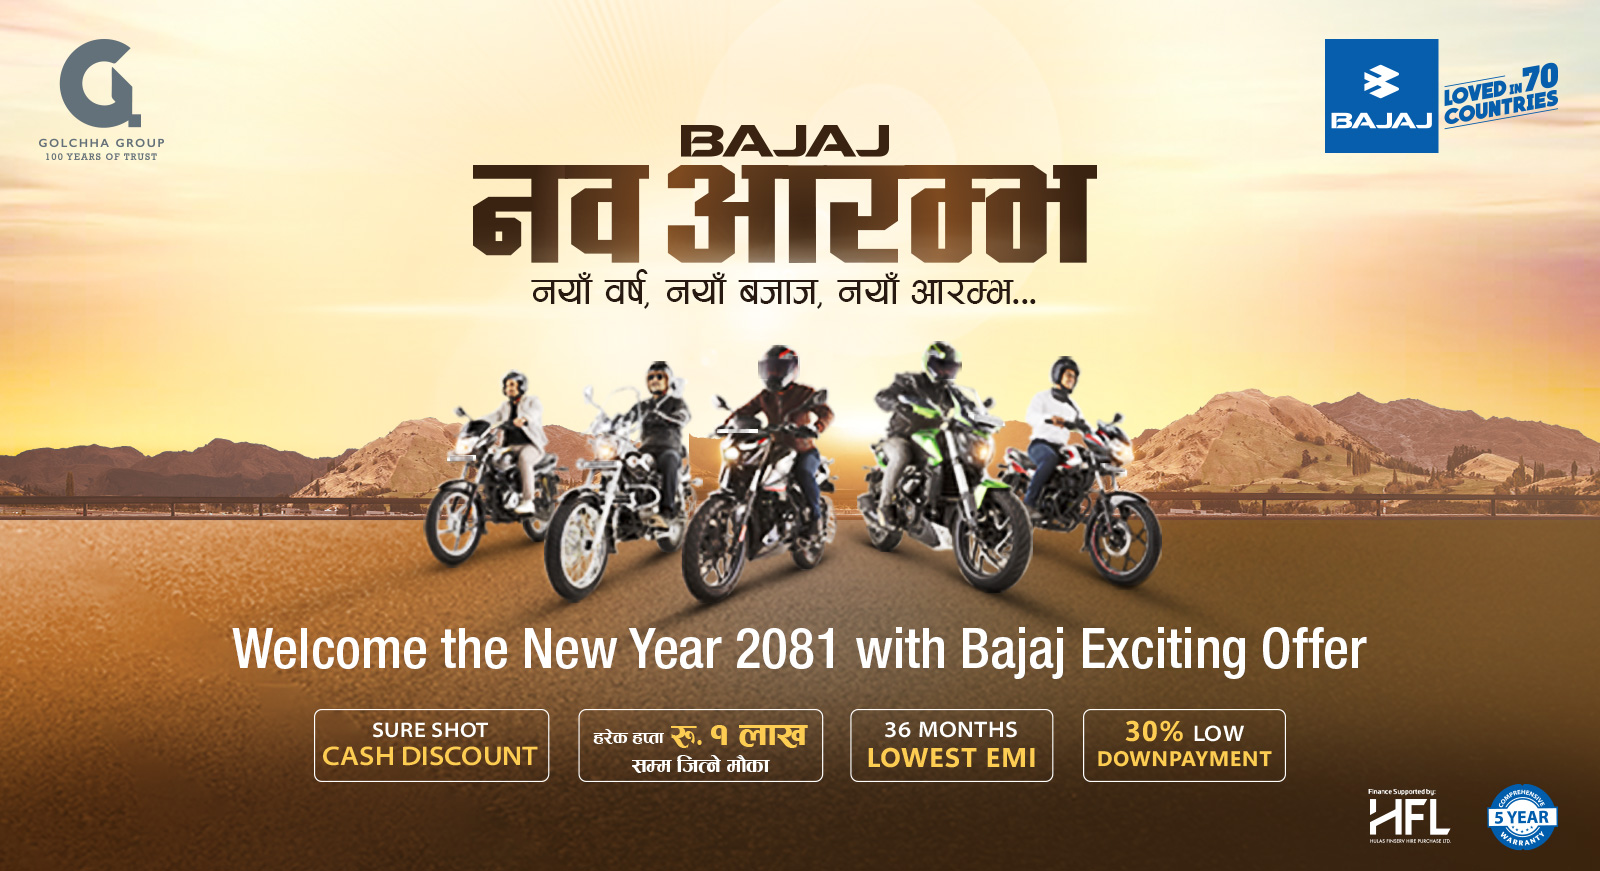 New Year Offer 2081